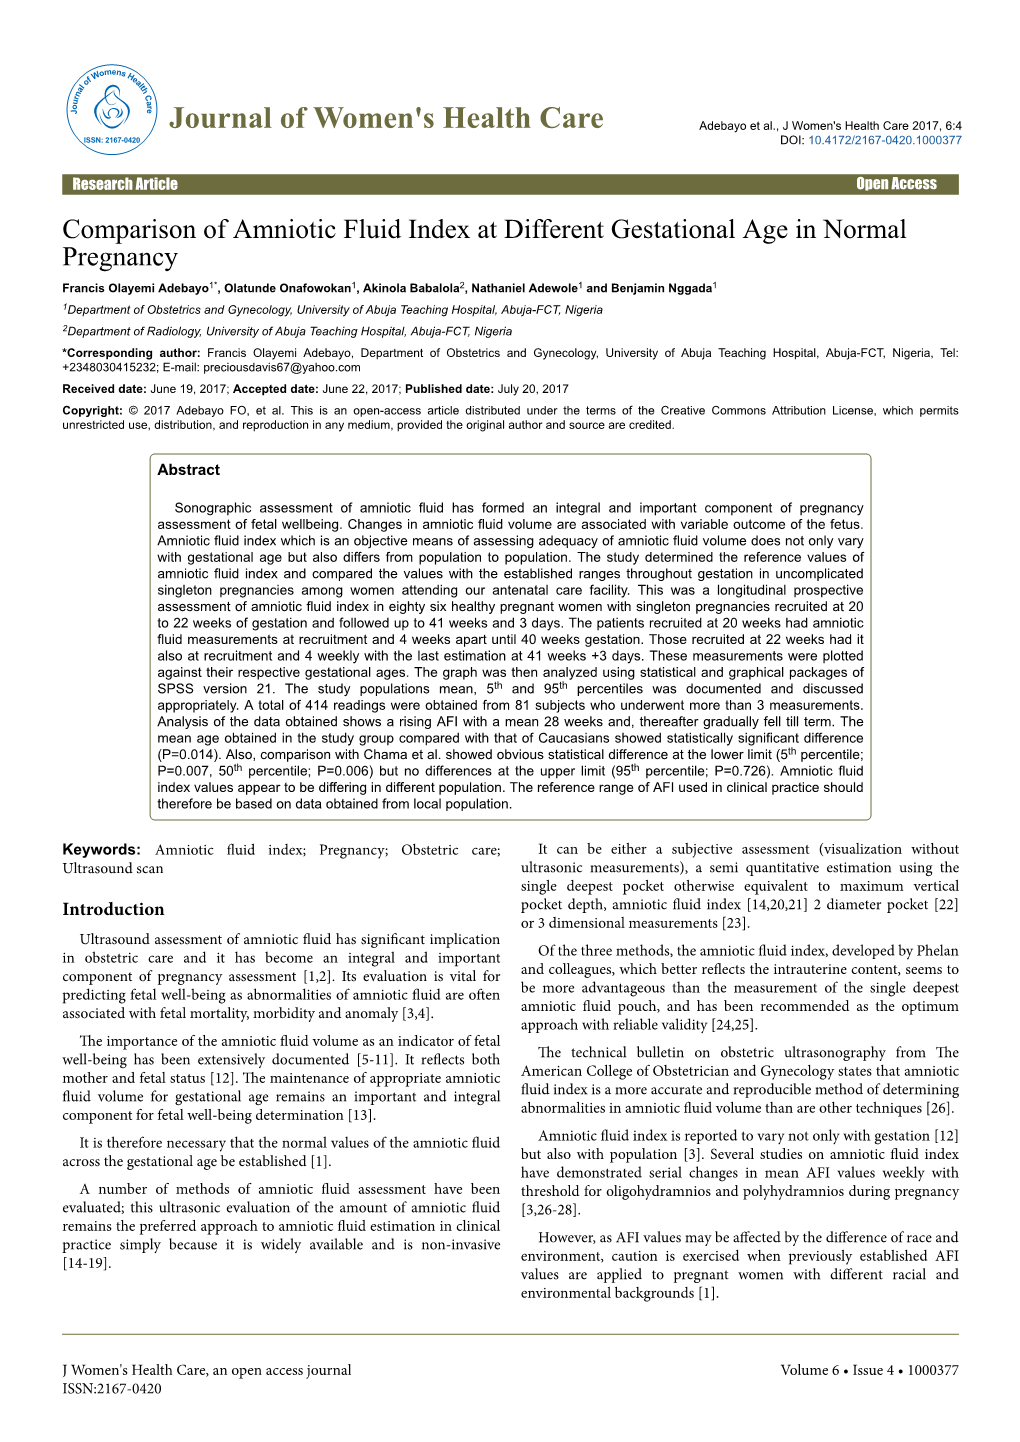 Comparison of Amniotic Fluid Index at Different Gestational Age in Normal